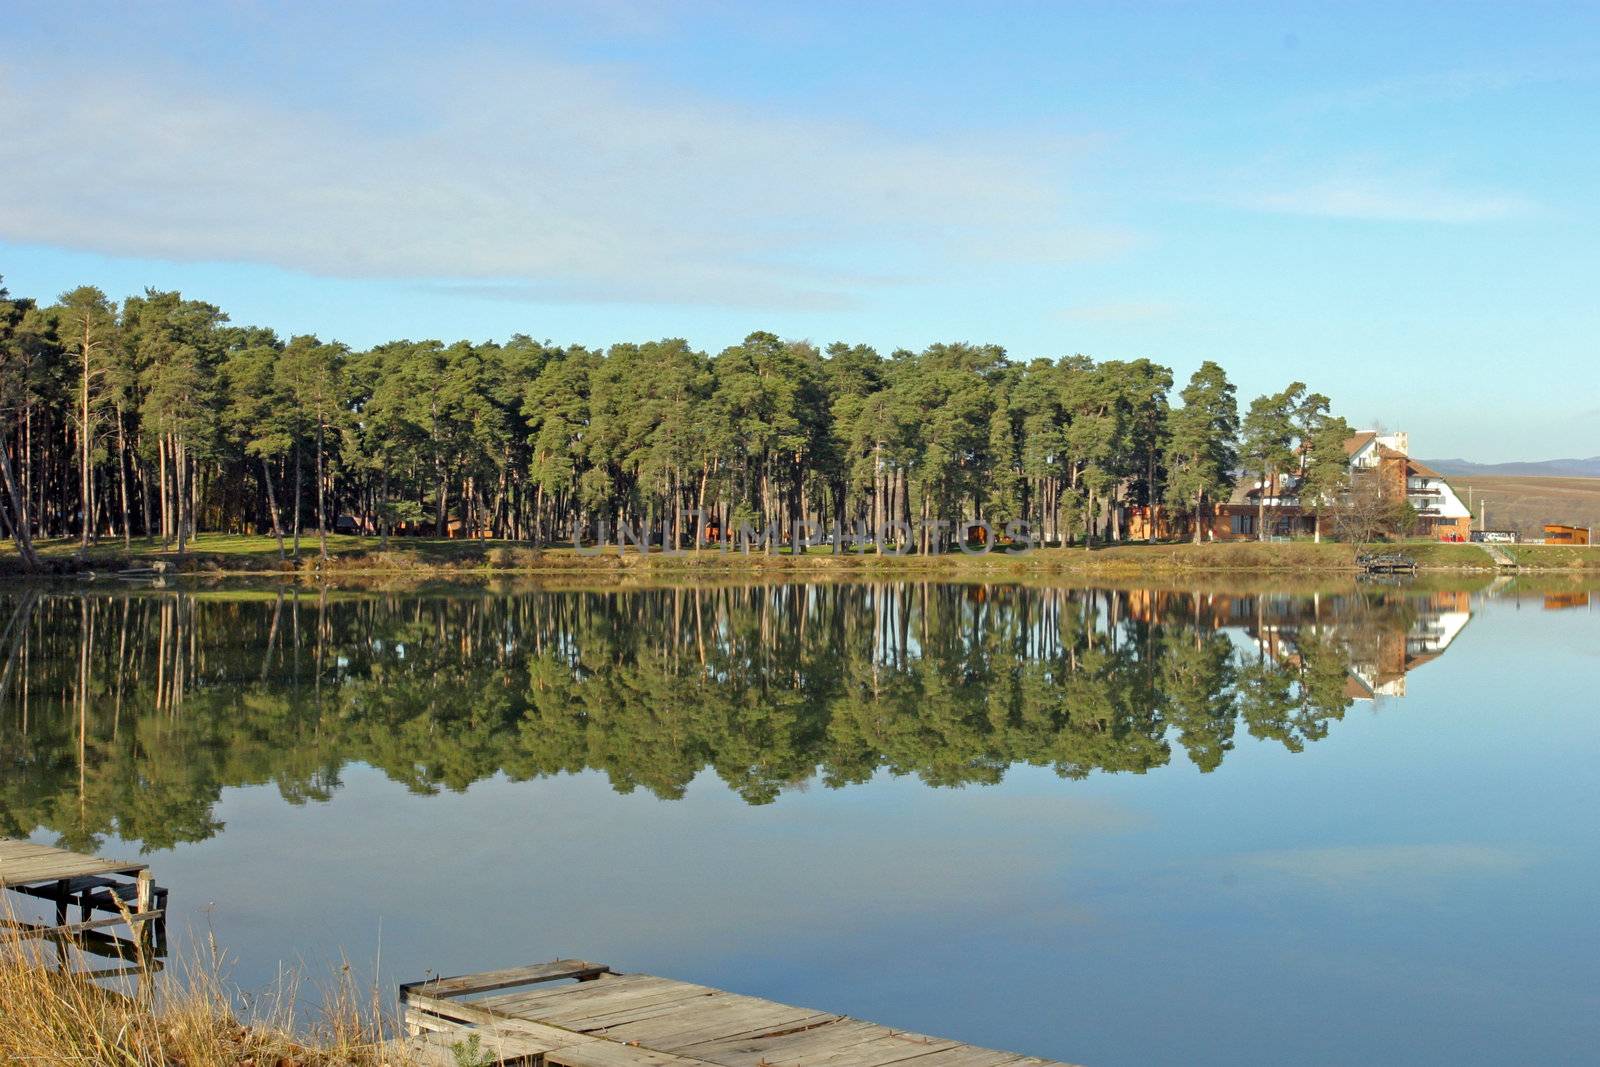 A pacific lake with good reflections near the forest.